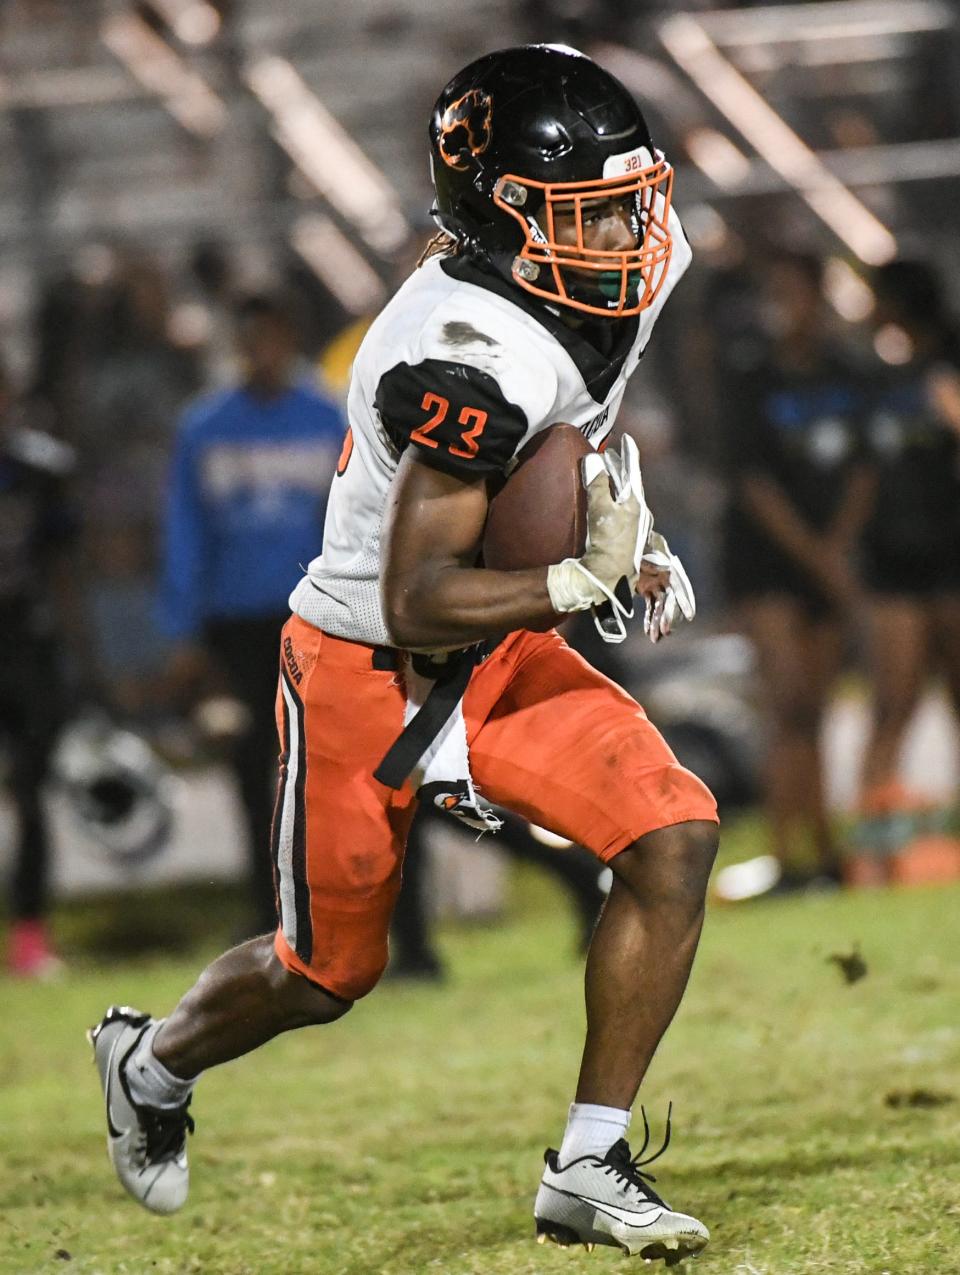 Latrison Lane of Cocoa gains big yardage against Titusville during their District 12-2S football game Friday, October 13, 2023. Craig Bailey/FLORIDA TODAY via USA TODAY NETWORK